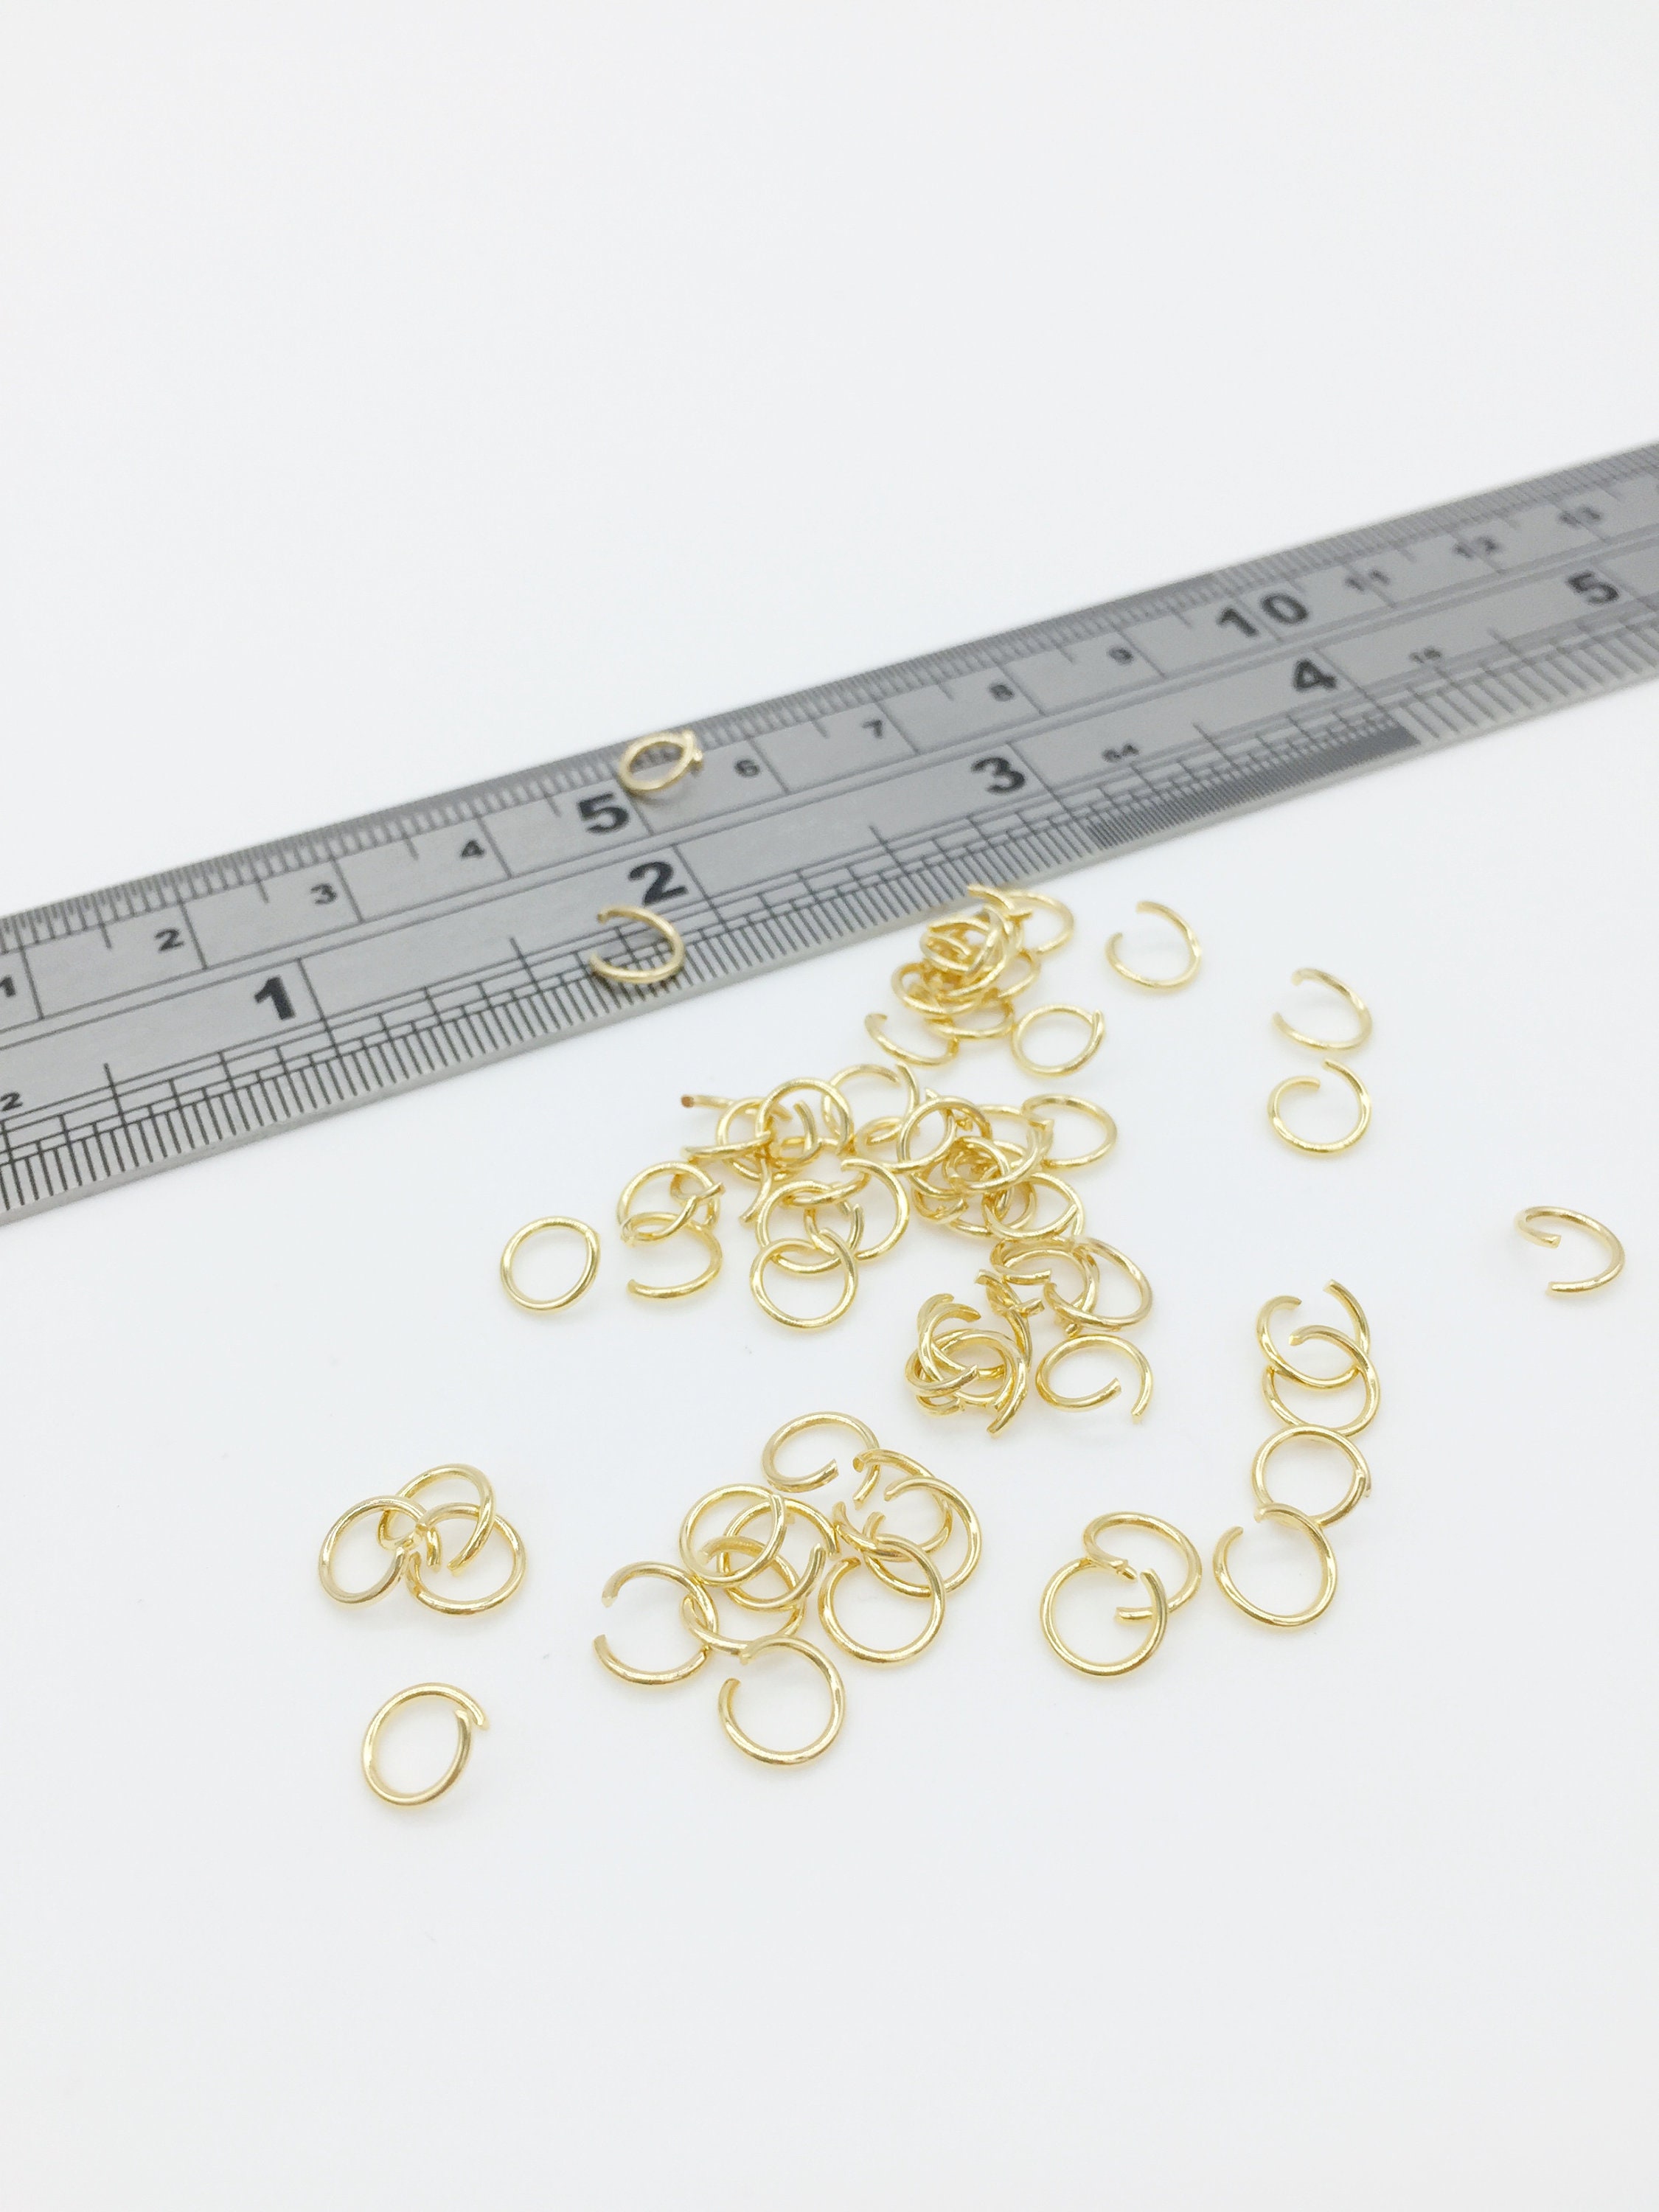 22K Gold Plated Open Jump Rings 5mm 20 Gauge (100)